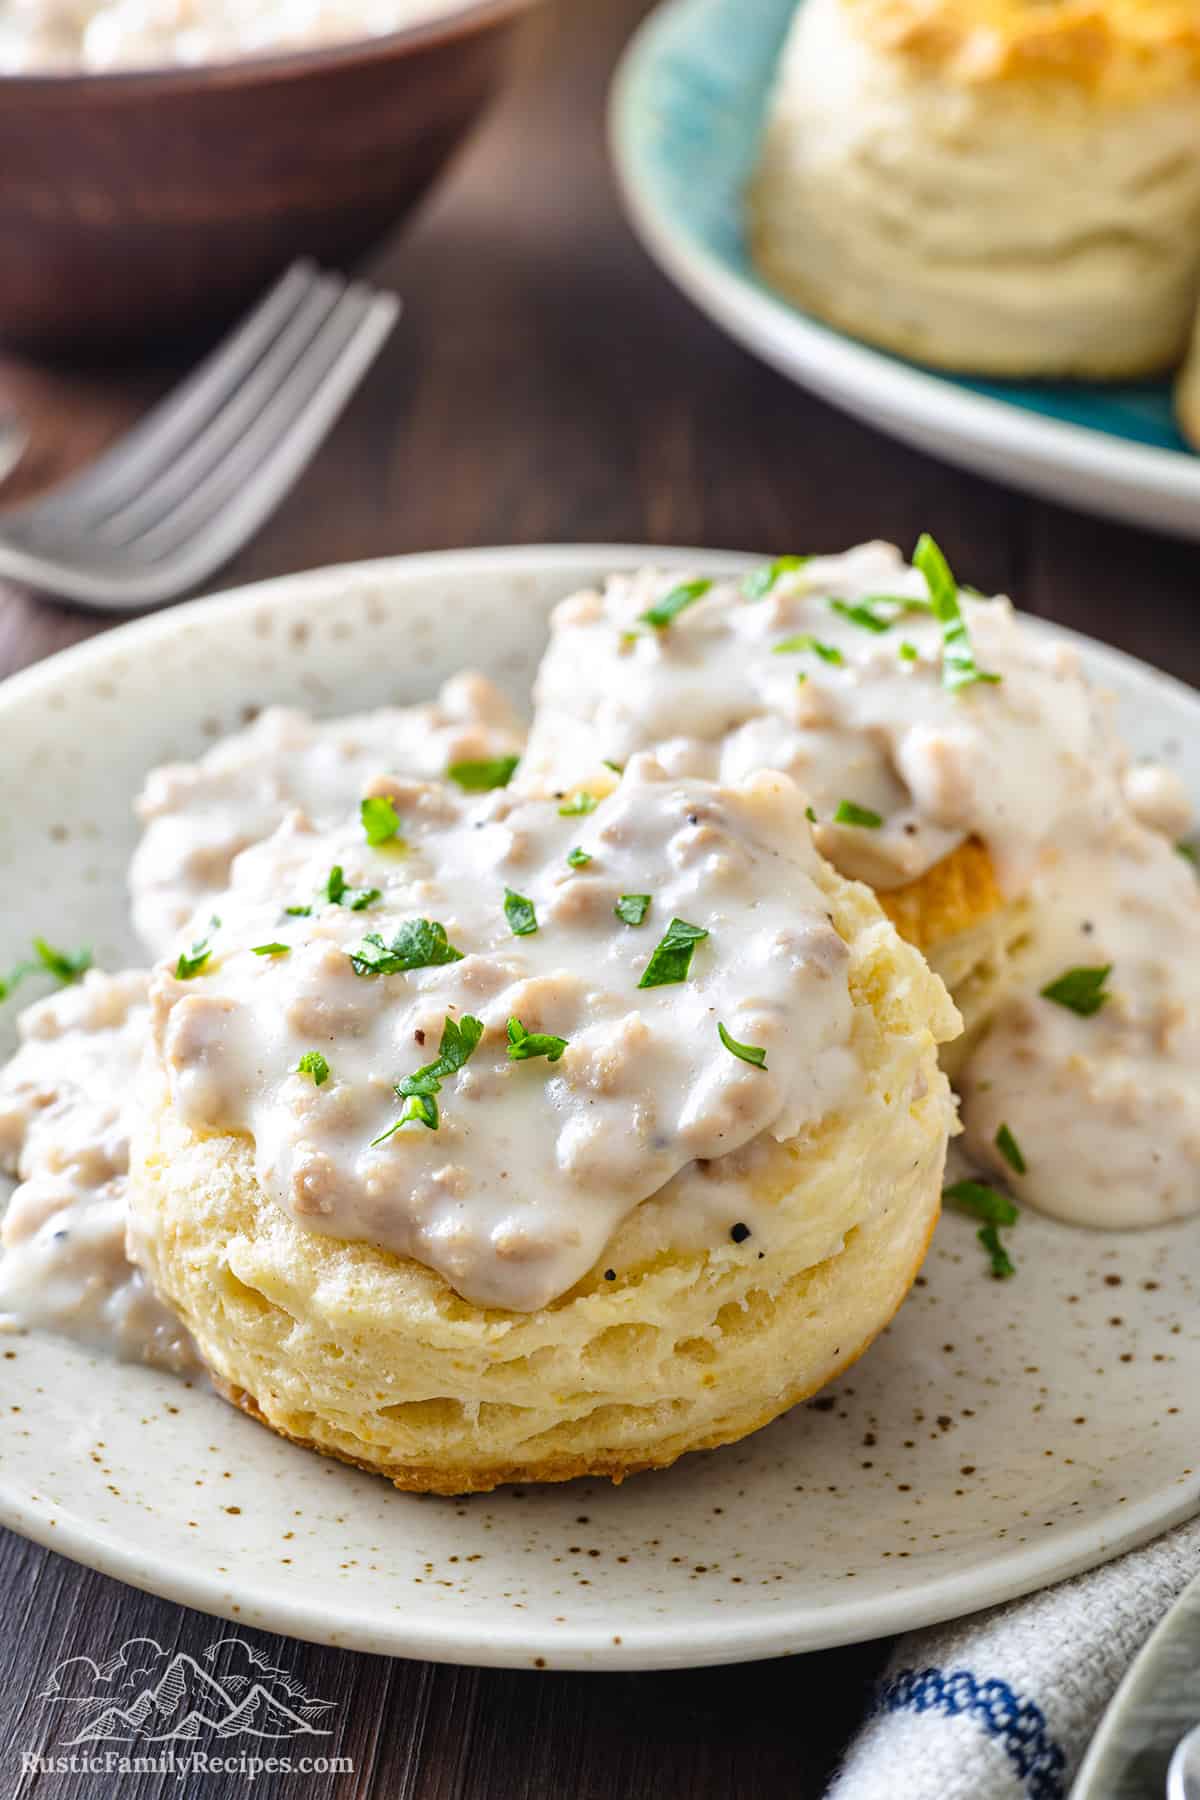 A cathead biscuit cut in half, smothered in gravy, and garnished with fresh parsley on a plate.